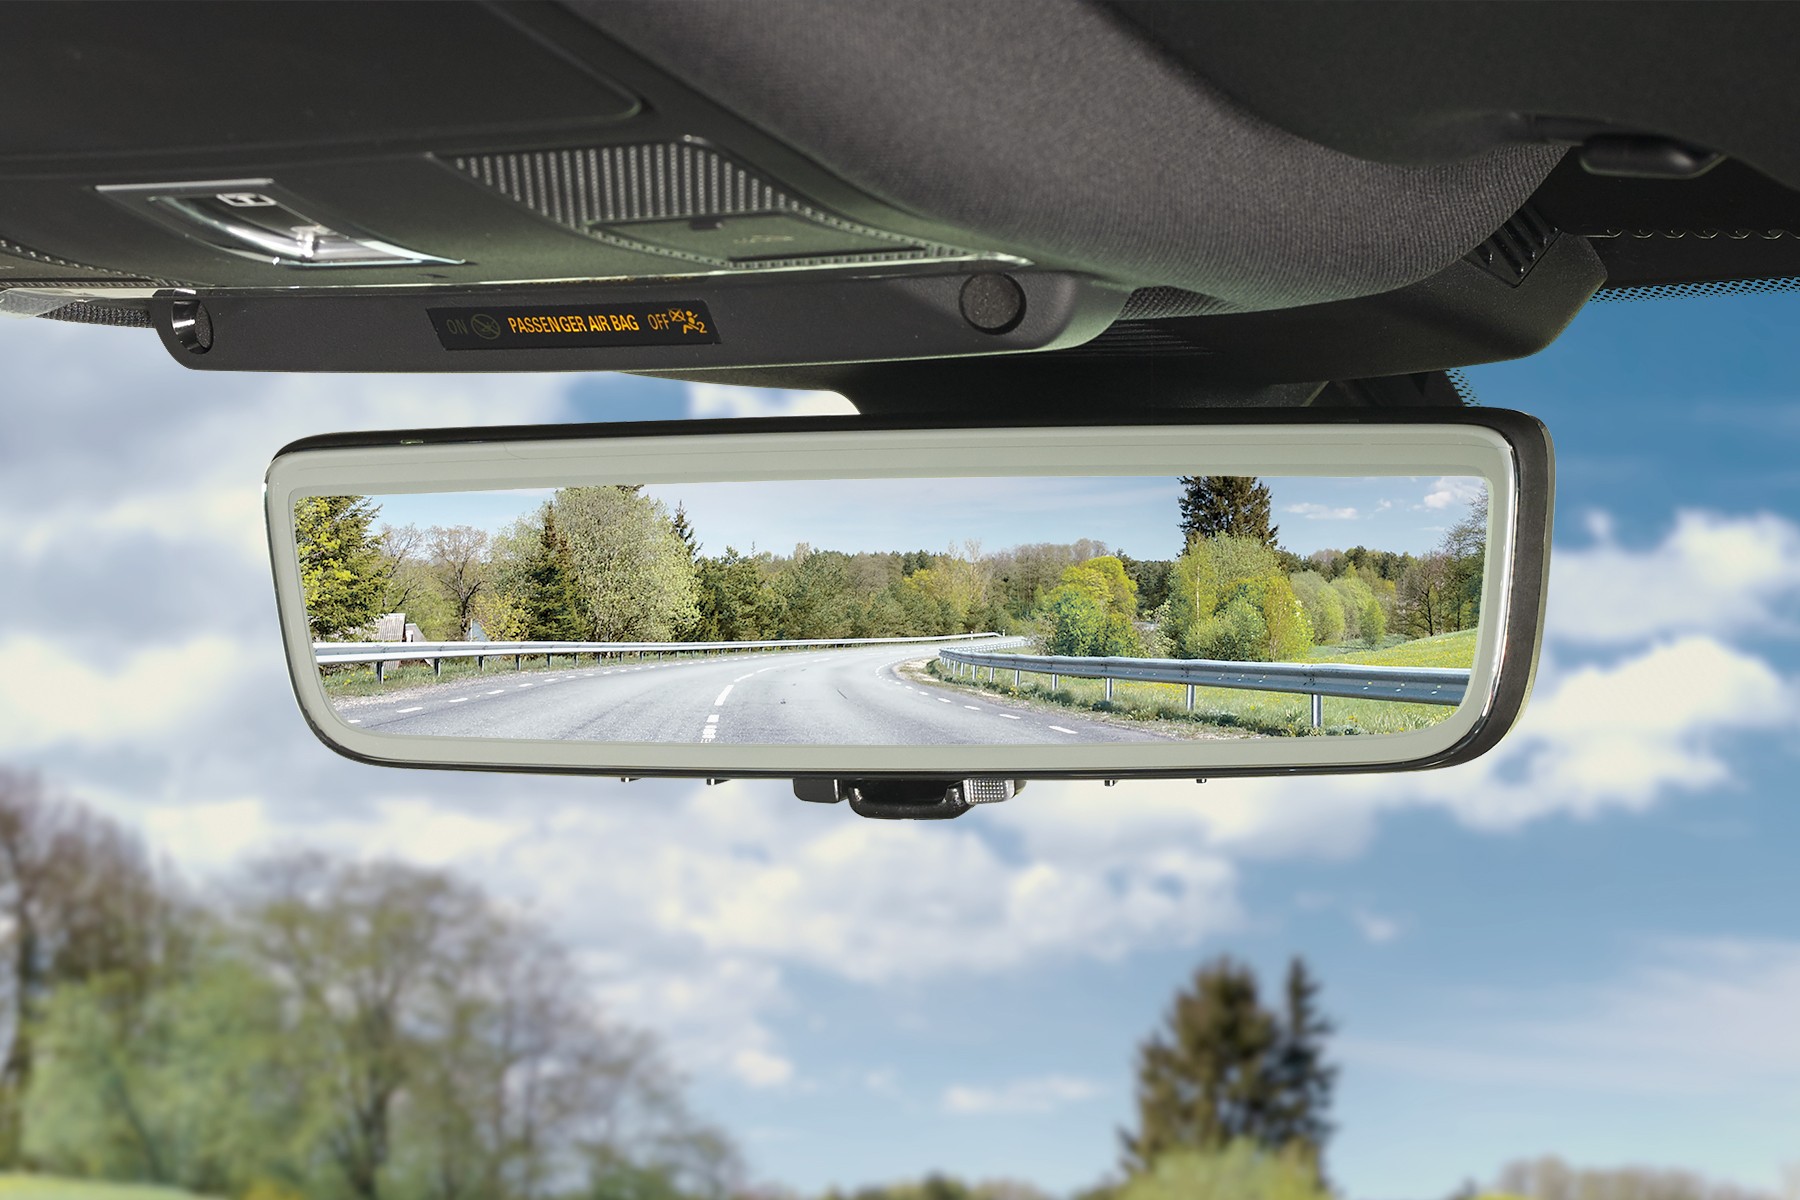 https://s1.cdn.autoevolution.com/images/news/gallery/2021-is-here-and-so-is-the-smart-mirror-making-dash-cams-obsolete_6.jpg